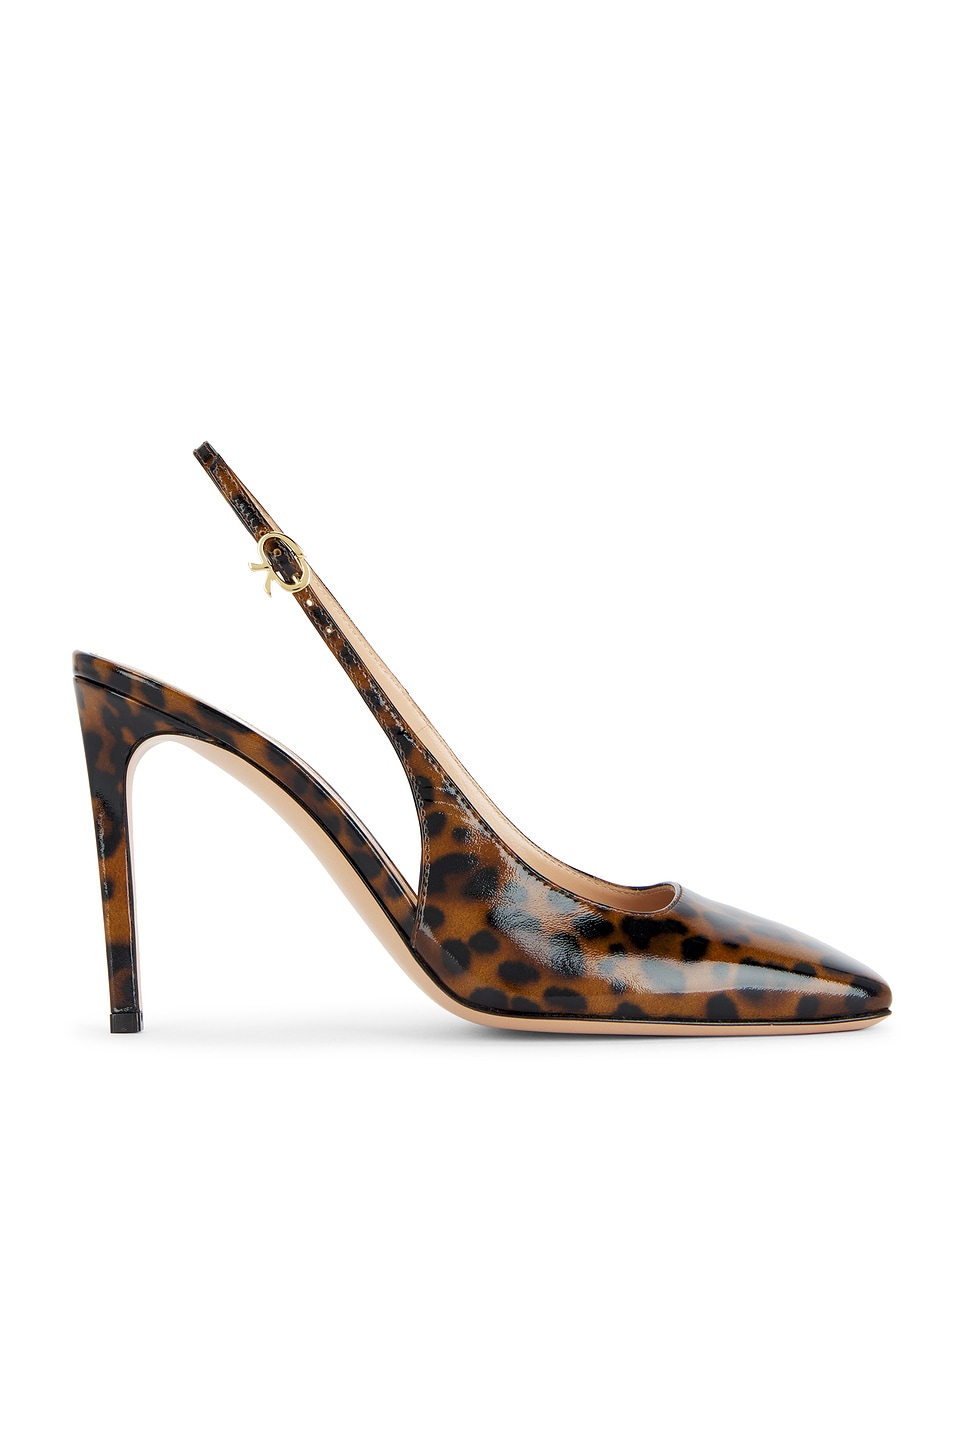 Image 1 of Gianvito Rossi Christina Sling Nuit Pump in Leopard Print